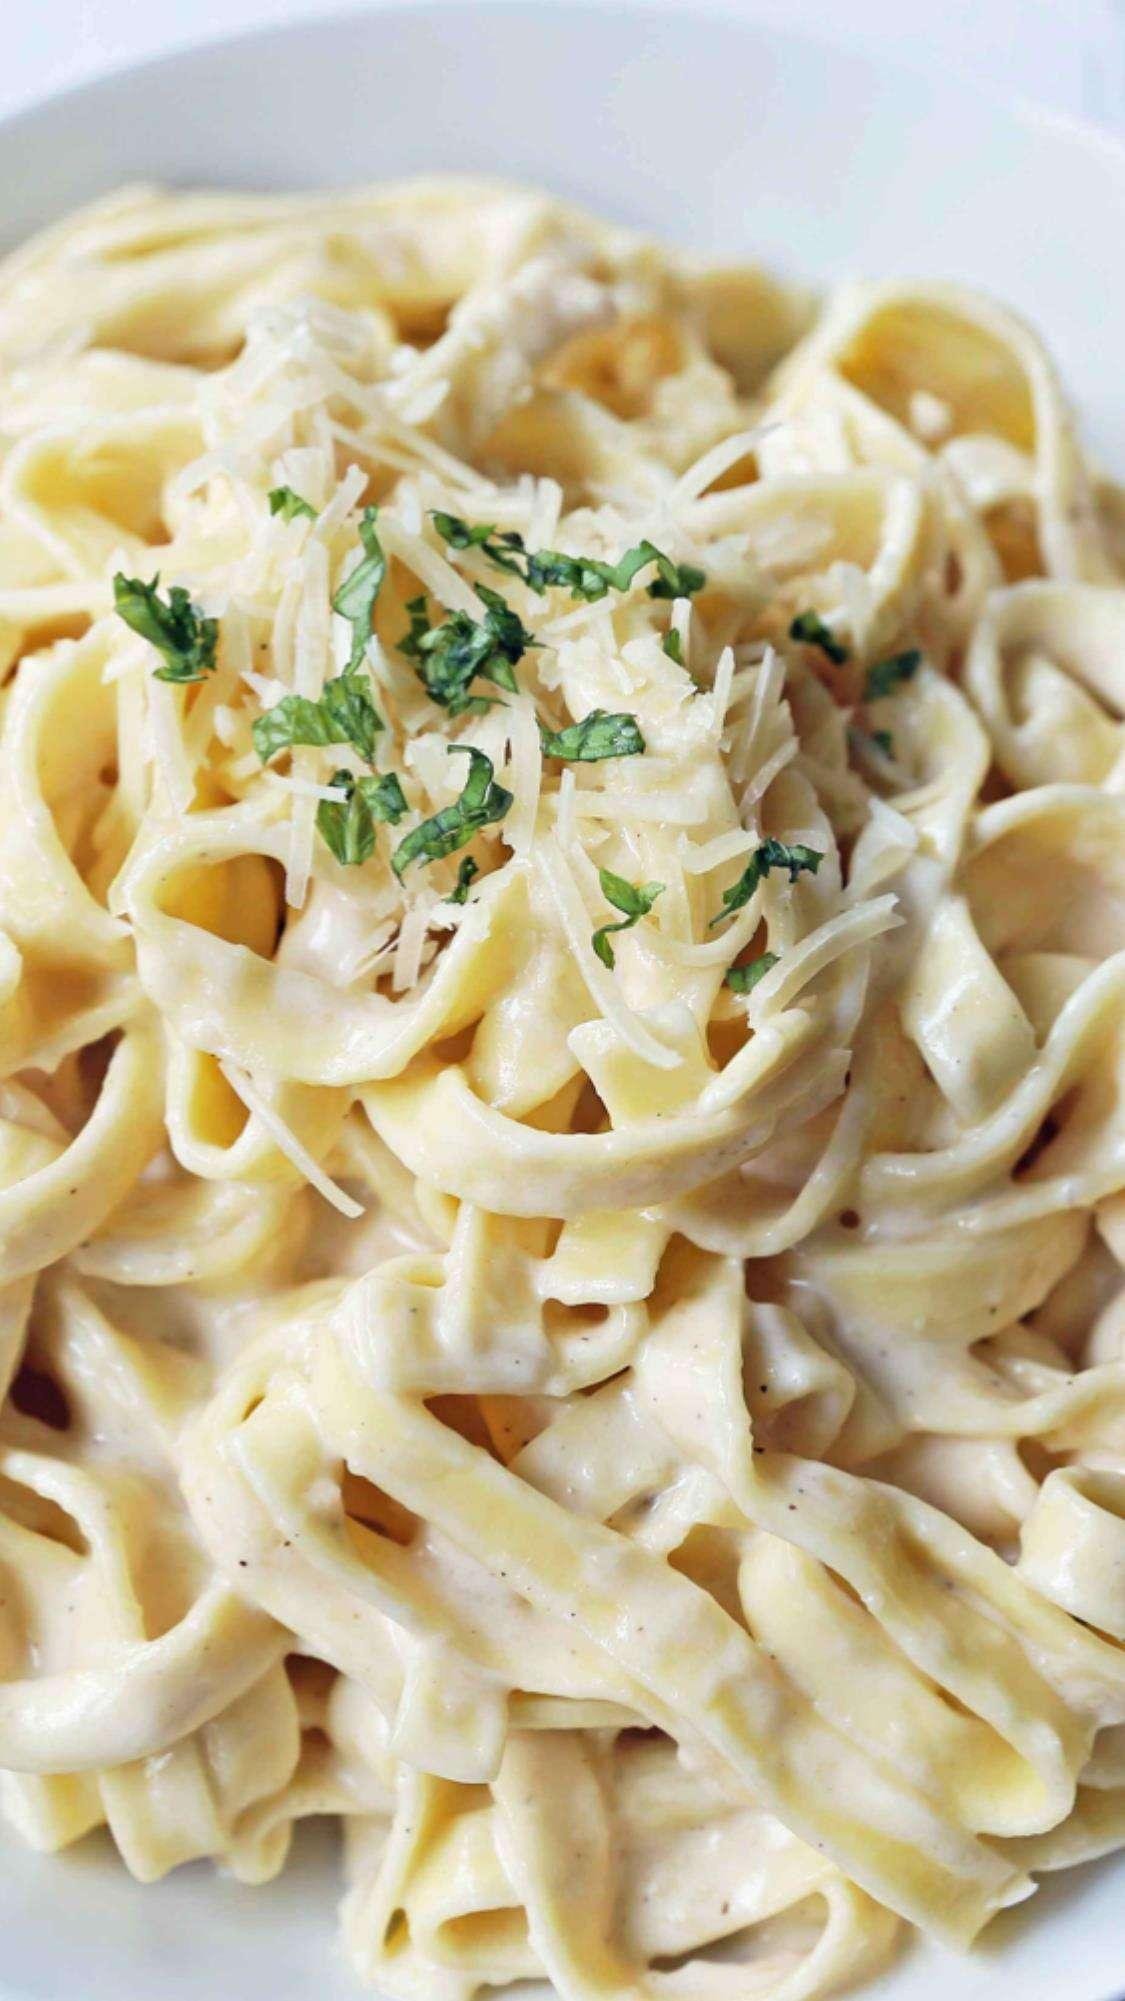 The Perfect Pasta: How to Make Homemade Fettuccine Alfredo